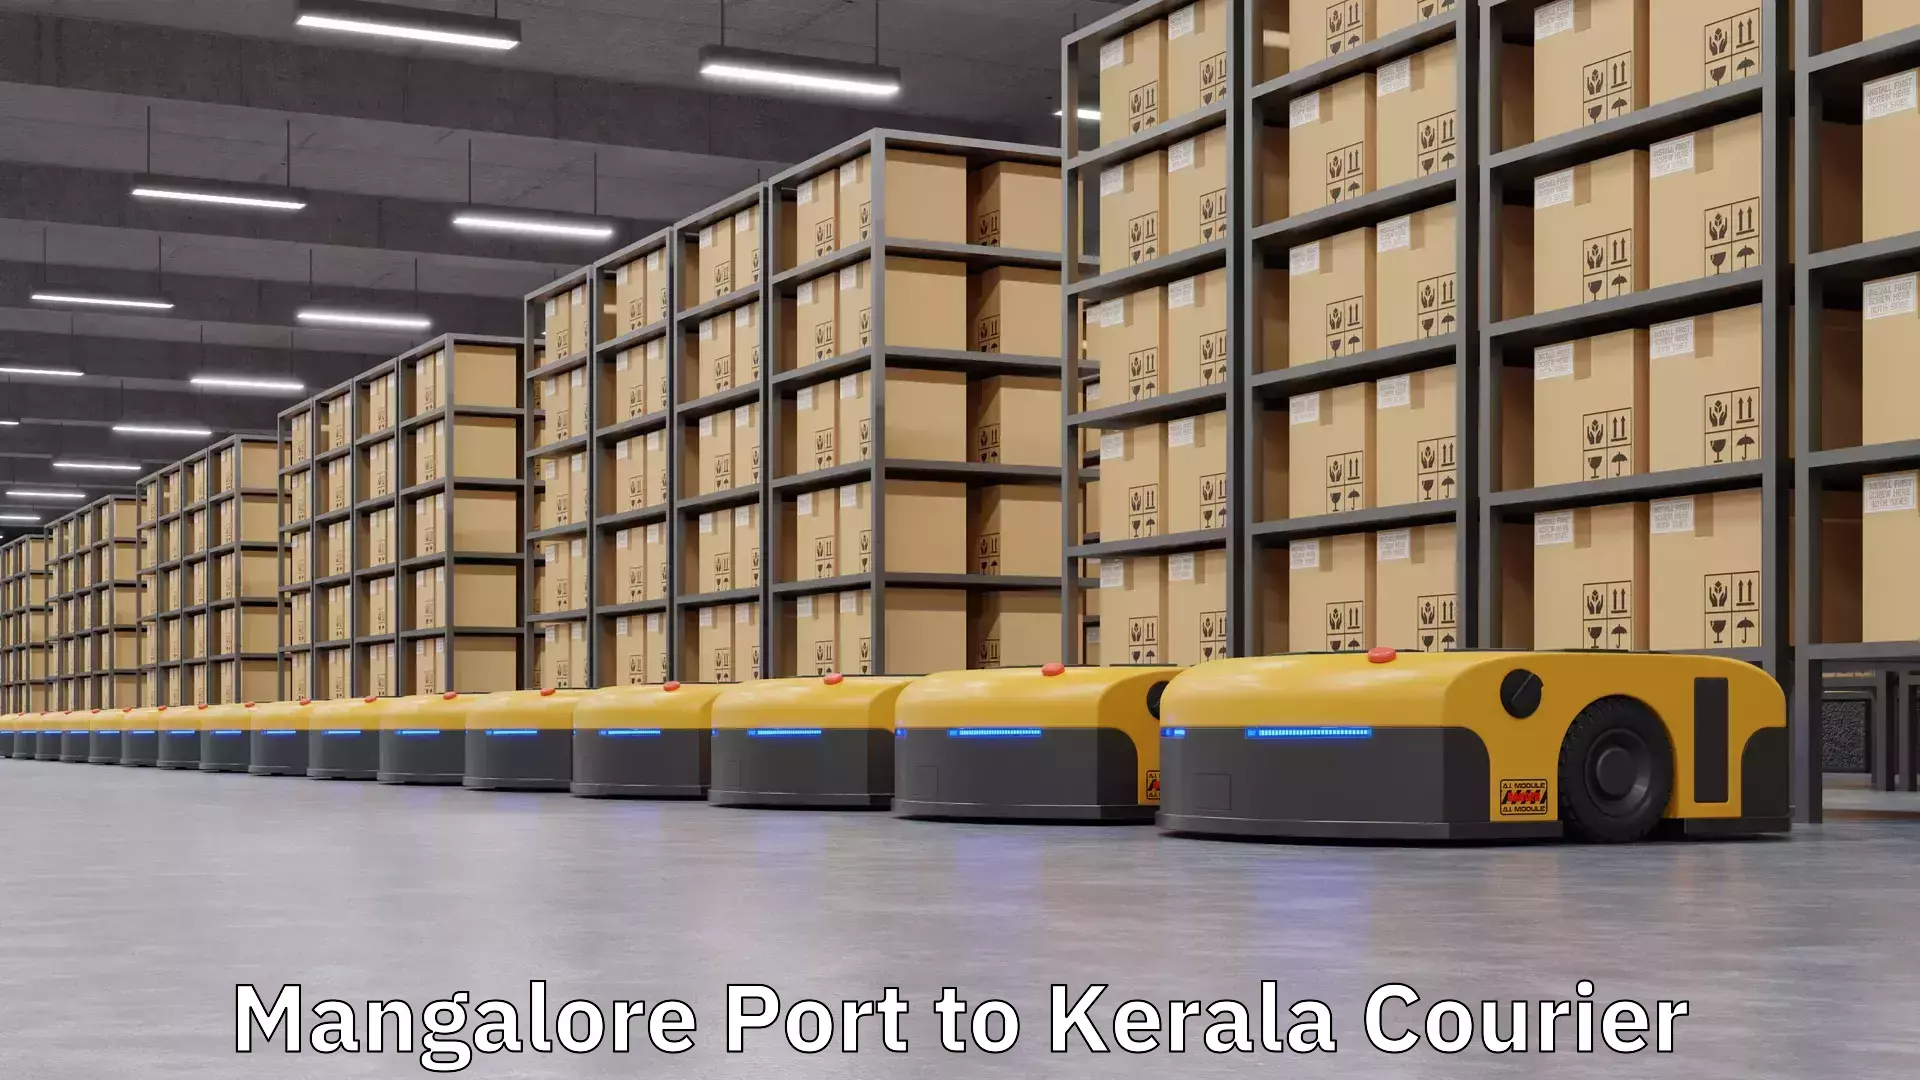 Reliable delivery network Mangalore Port to Kerala